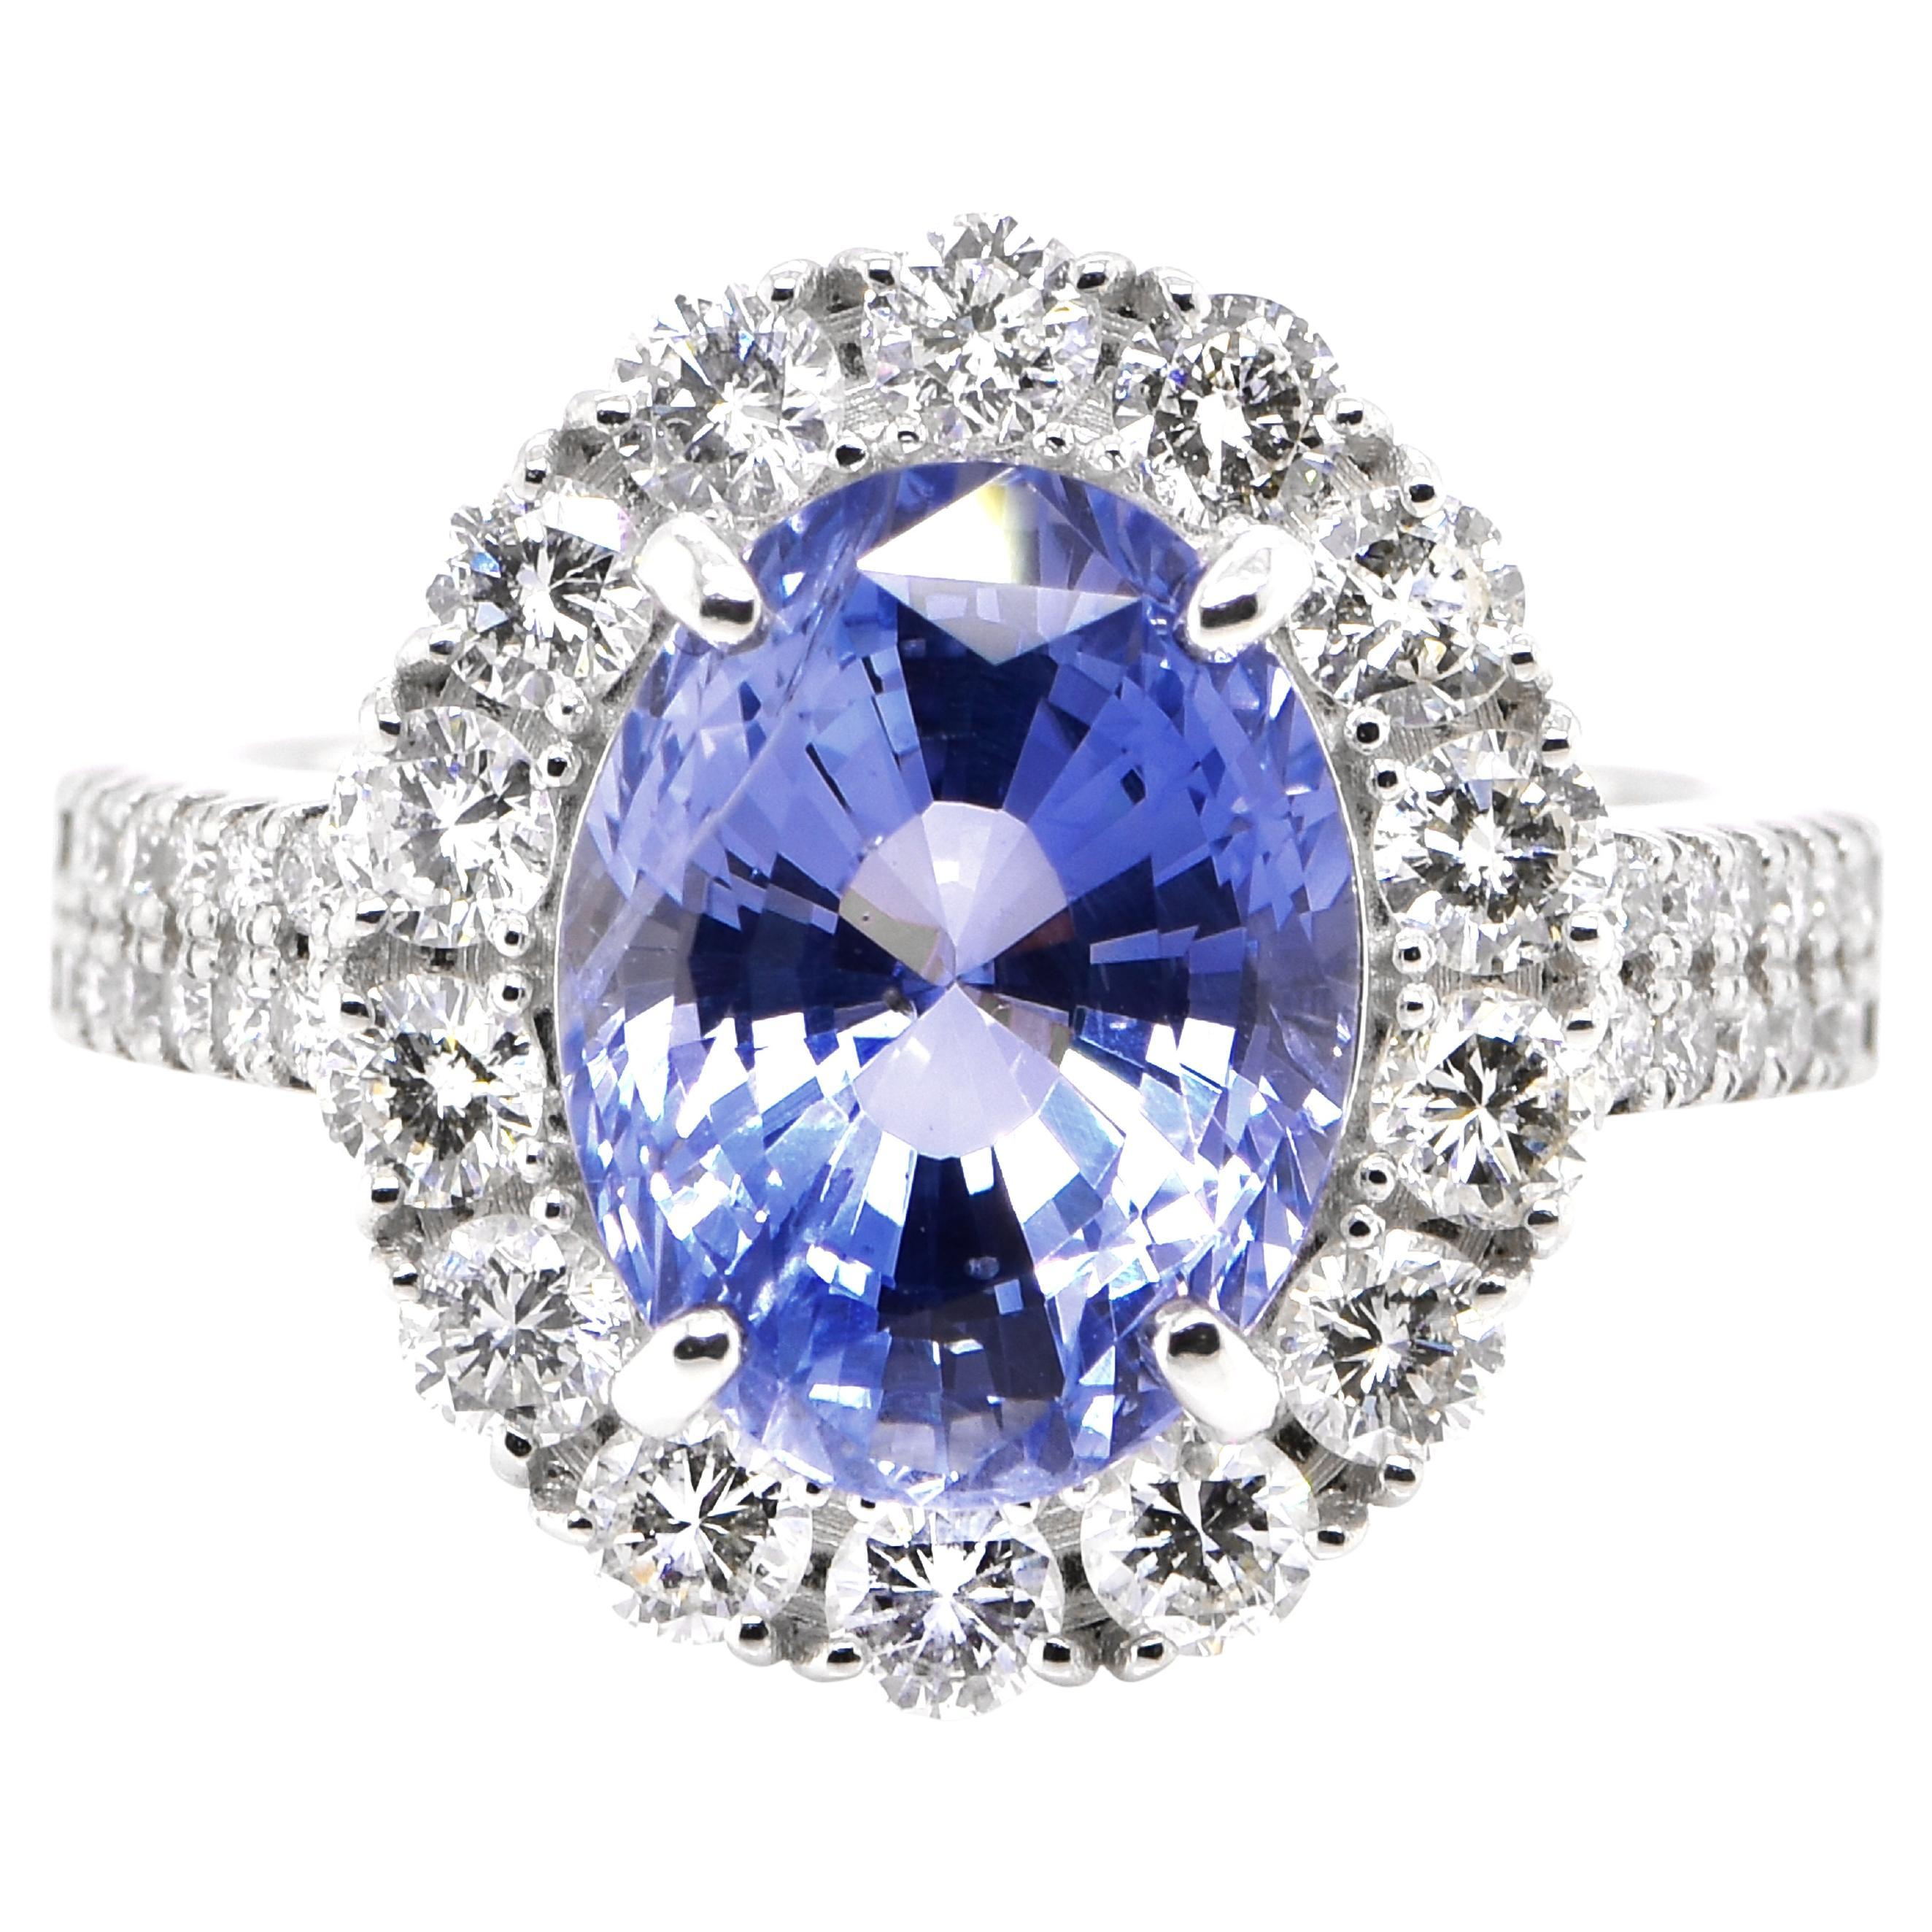 6.00 Carat Natural Unheated Sapphire and Diamond Cocktail Ring Made in Platinum